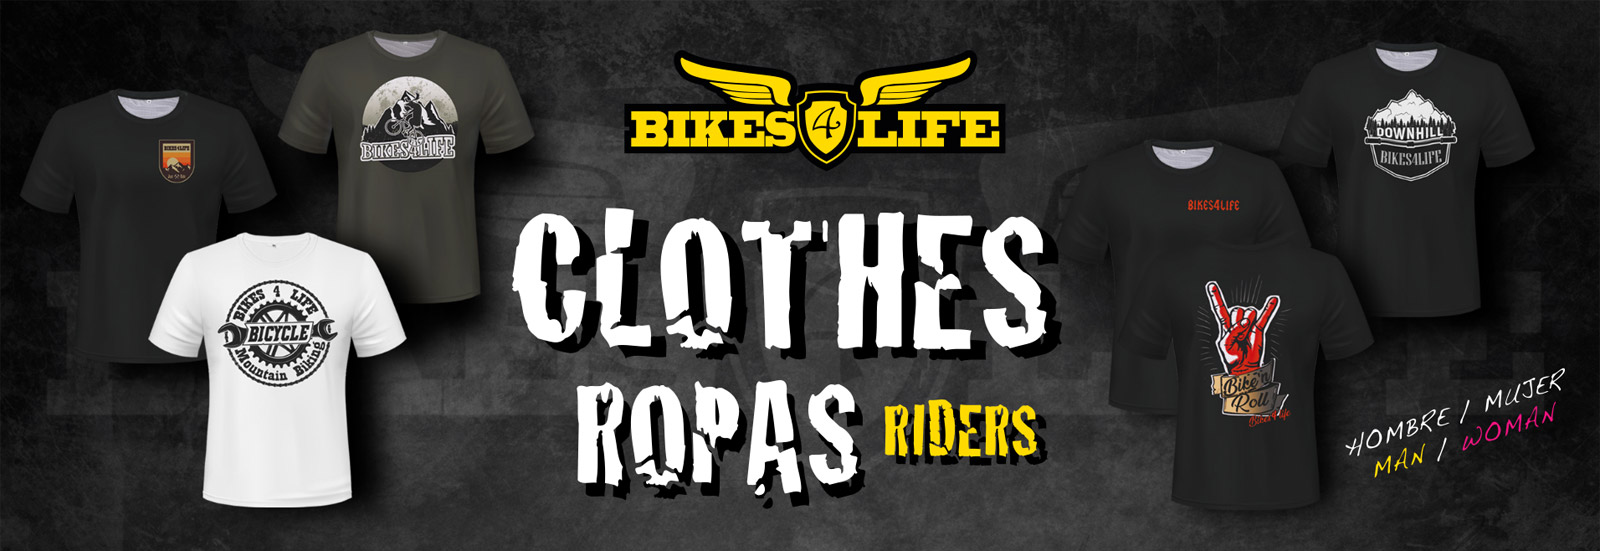 Clothes Riders